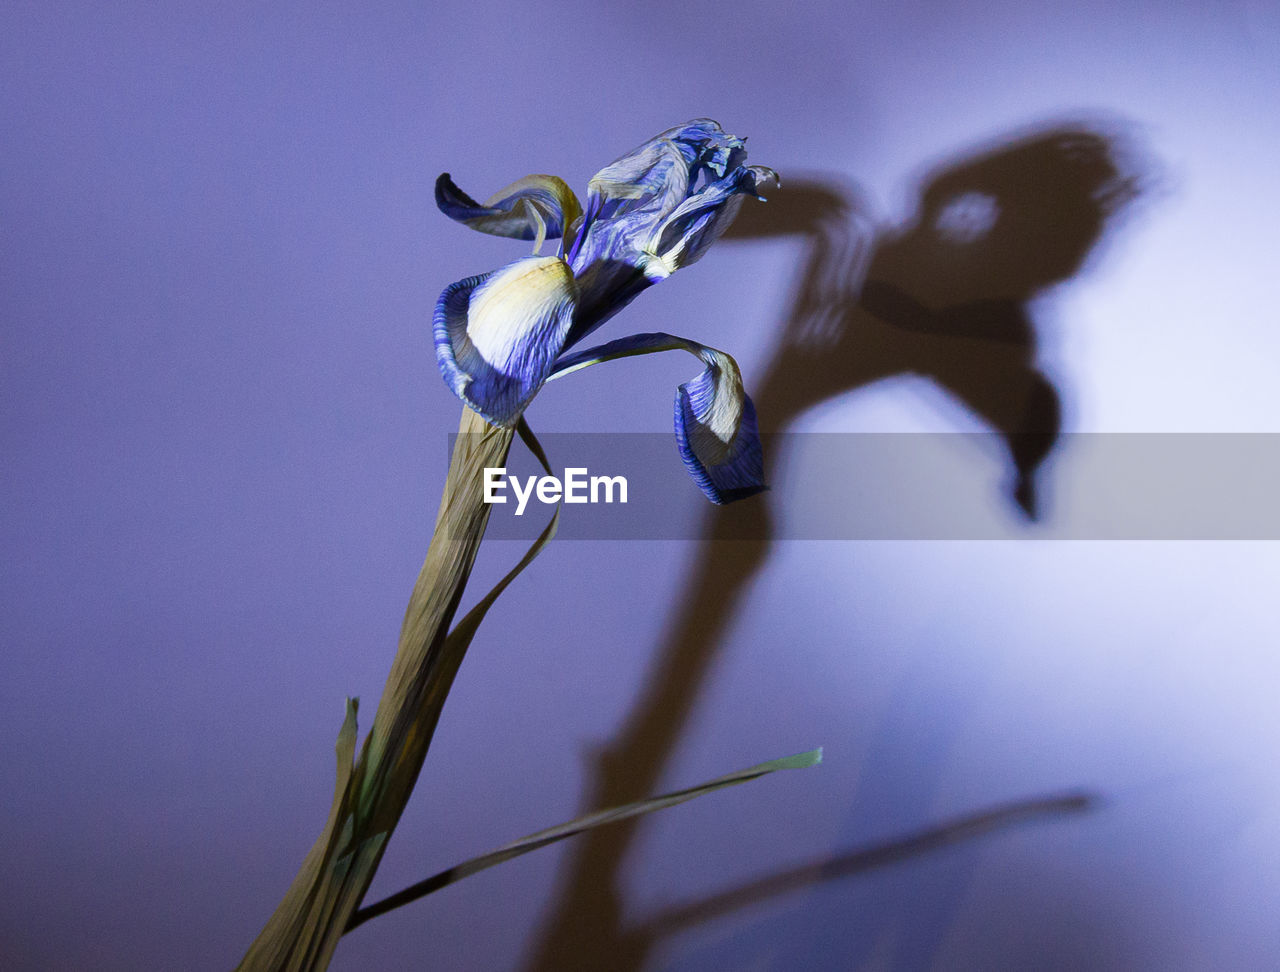 Dying iris and its shadow against a grey-blue wall